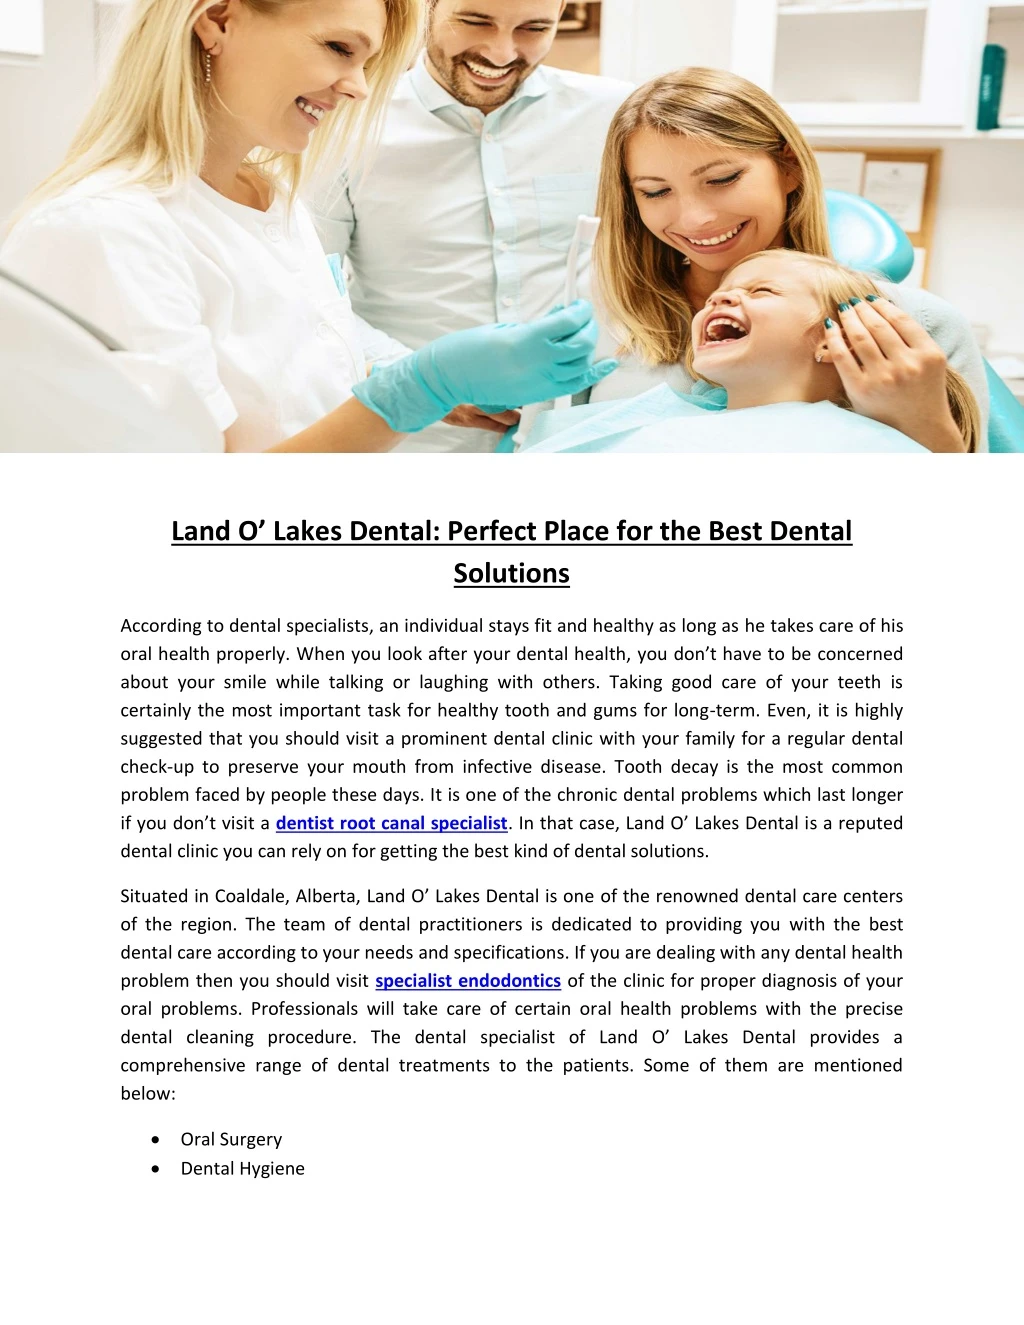 land o lake s dental perfect place for the best